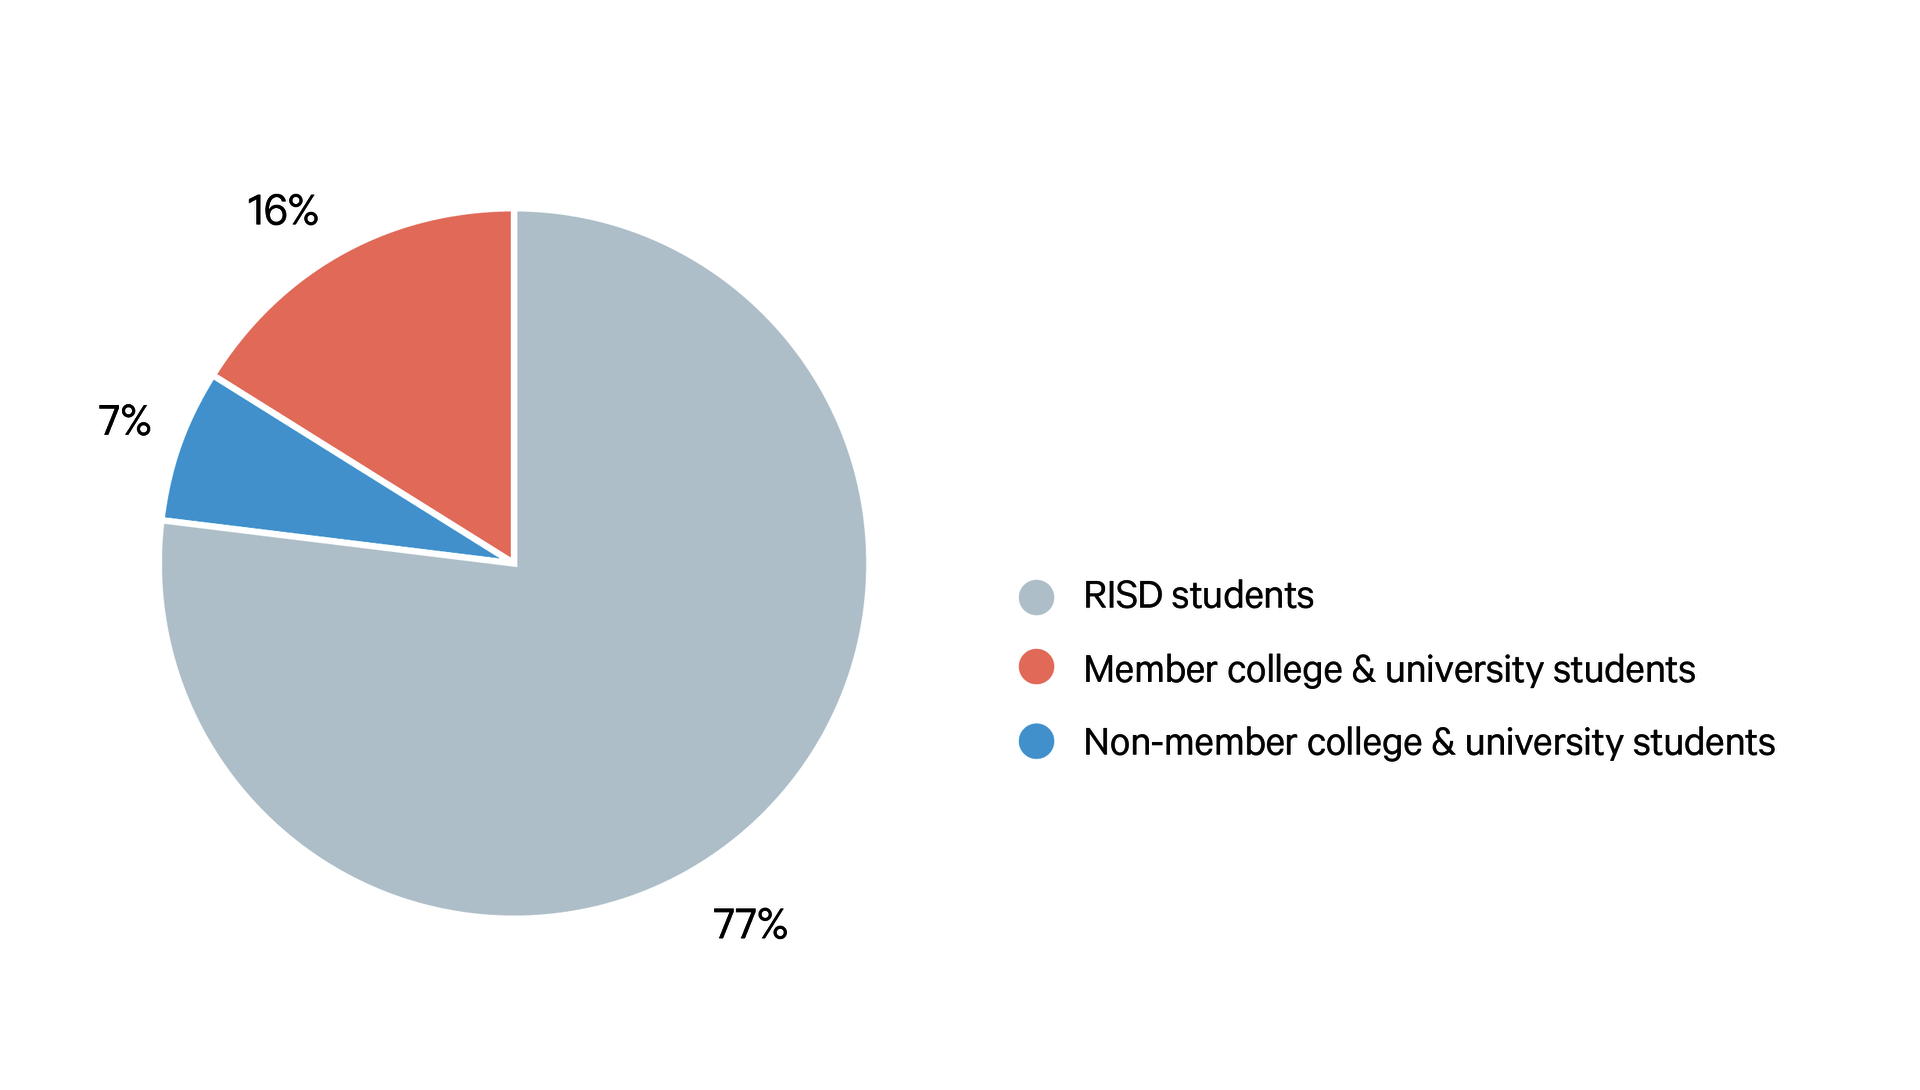 Pie-chart graphic. 77% is colored gray (RISD Students). 16% is colored pink (Member College and University Students). 7% is colored blue (Non-Member College and University Students).